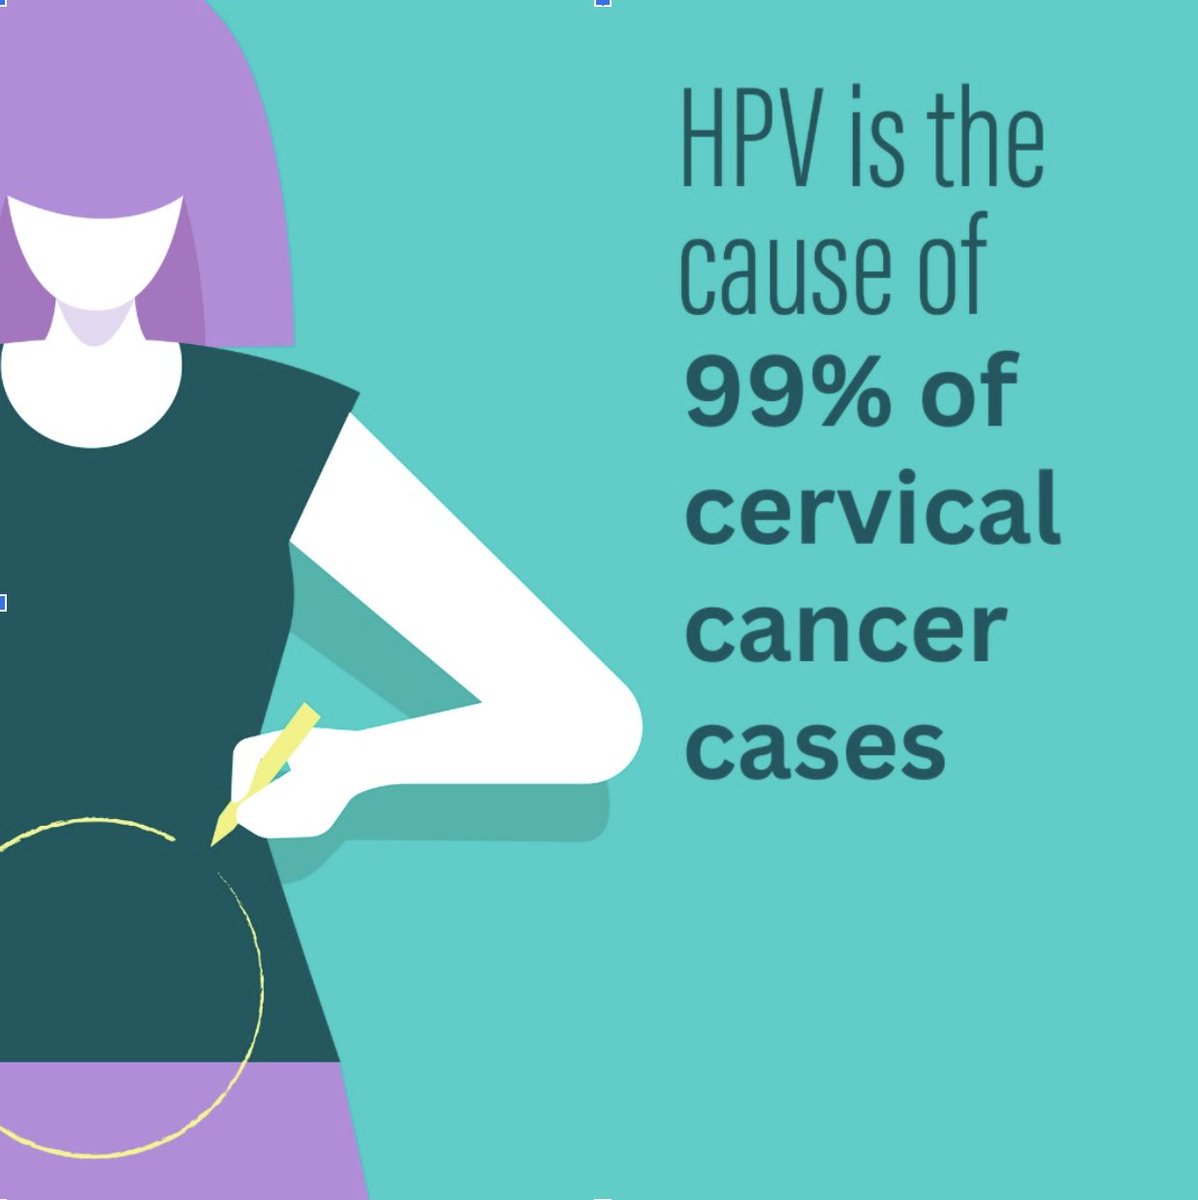 We know what it takes to boost HPV vaccination rates and eliminate HPV-related cancers. The time to act is now! Through concerted efforts and investment in #HPVVaccination programs, we can work together to realize Africa's vision of a world free of HPV cancers. #IHAD2024